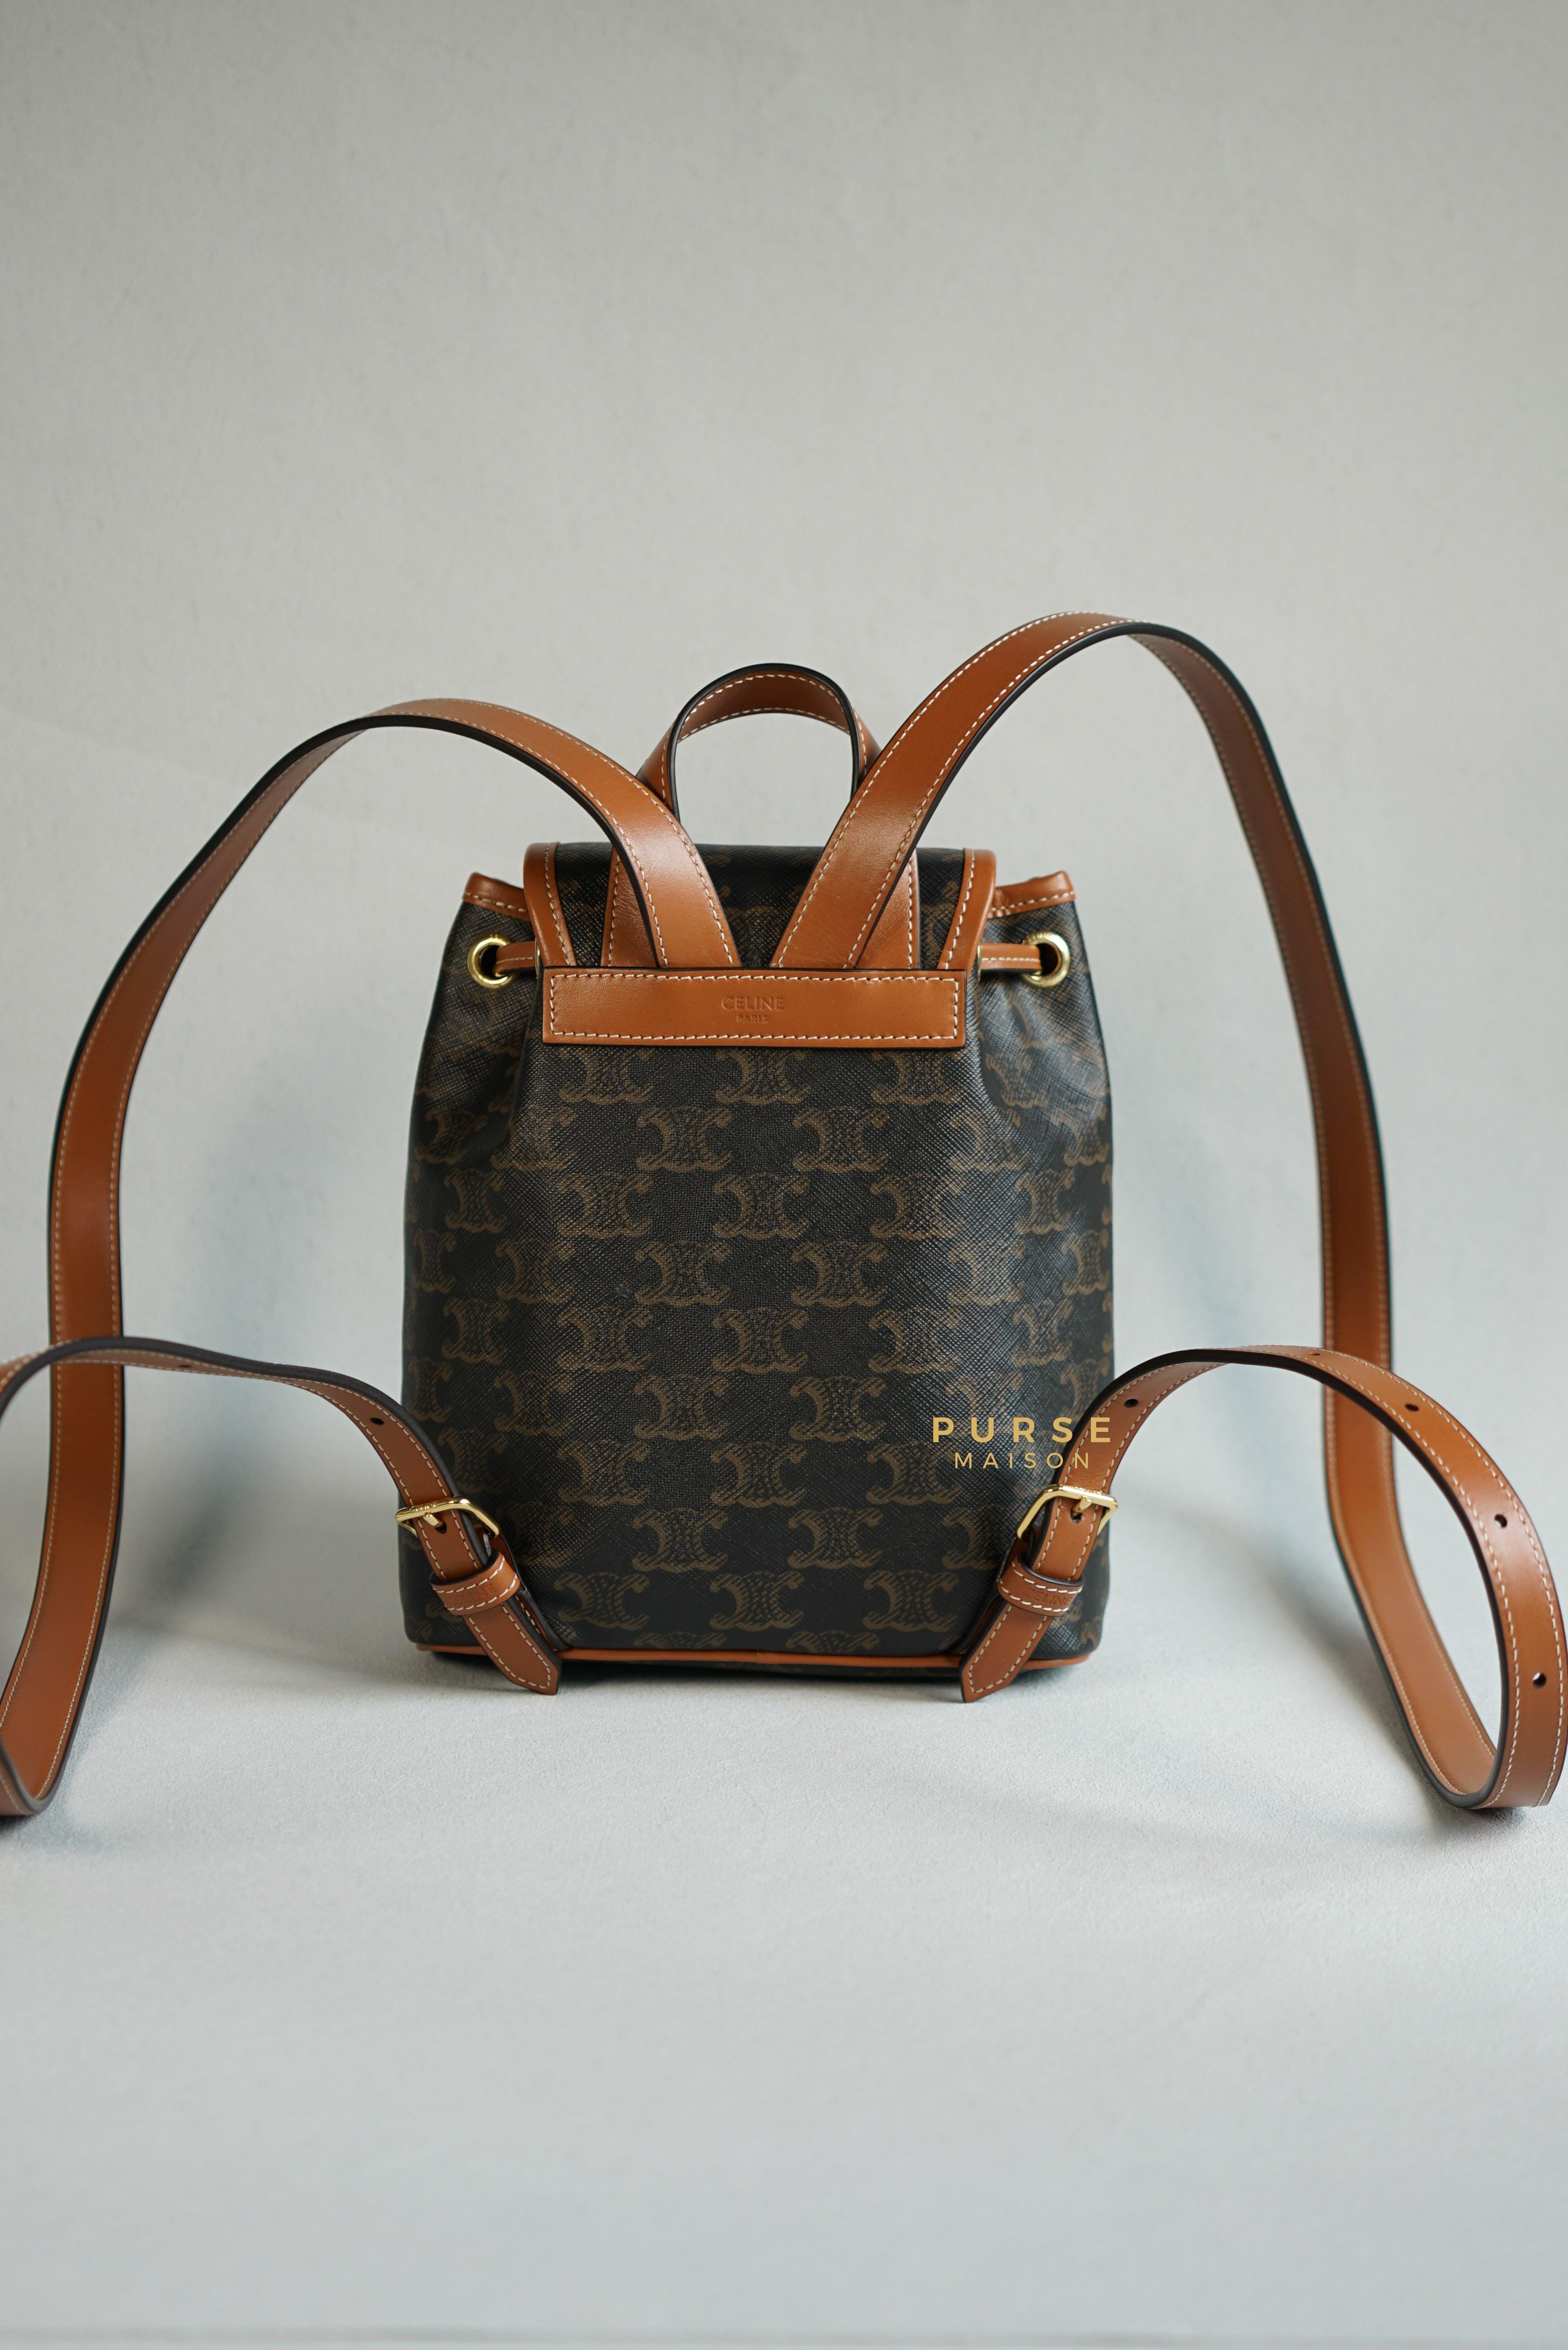 Folco backpack Celine Brown in Polyester - 31266964